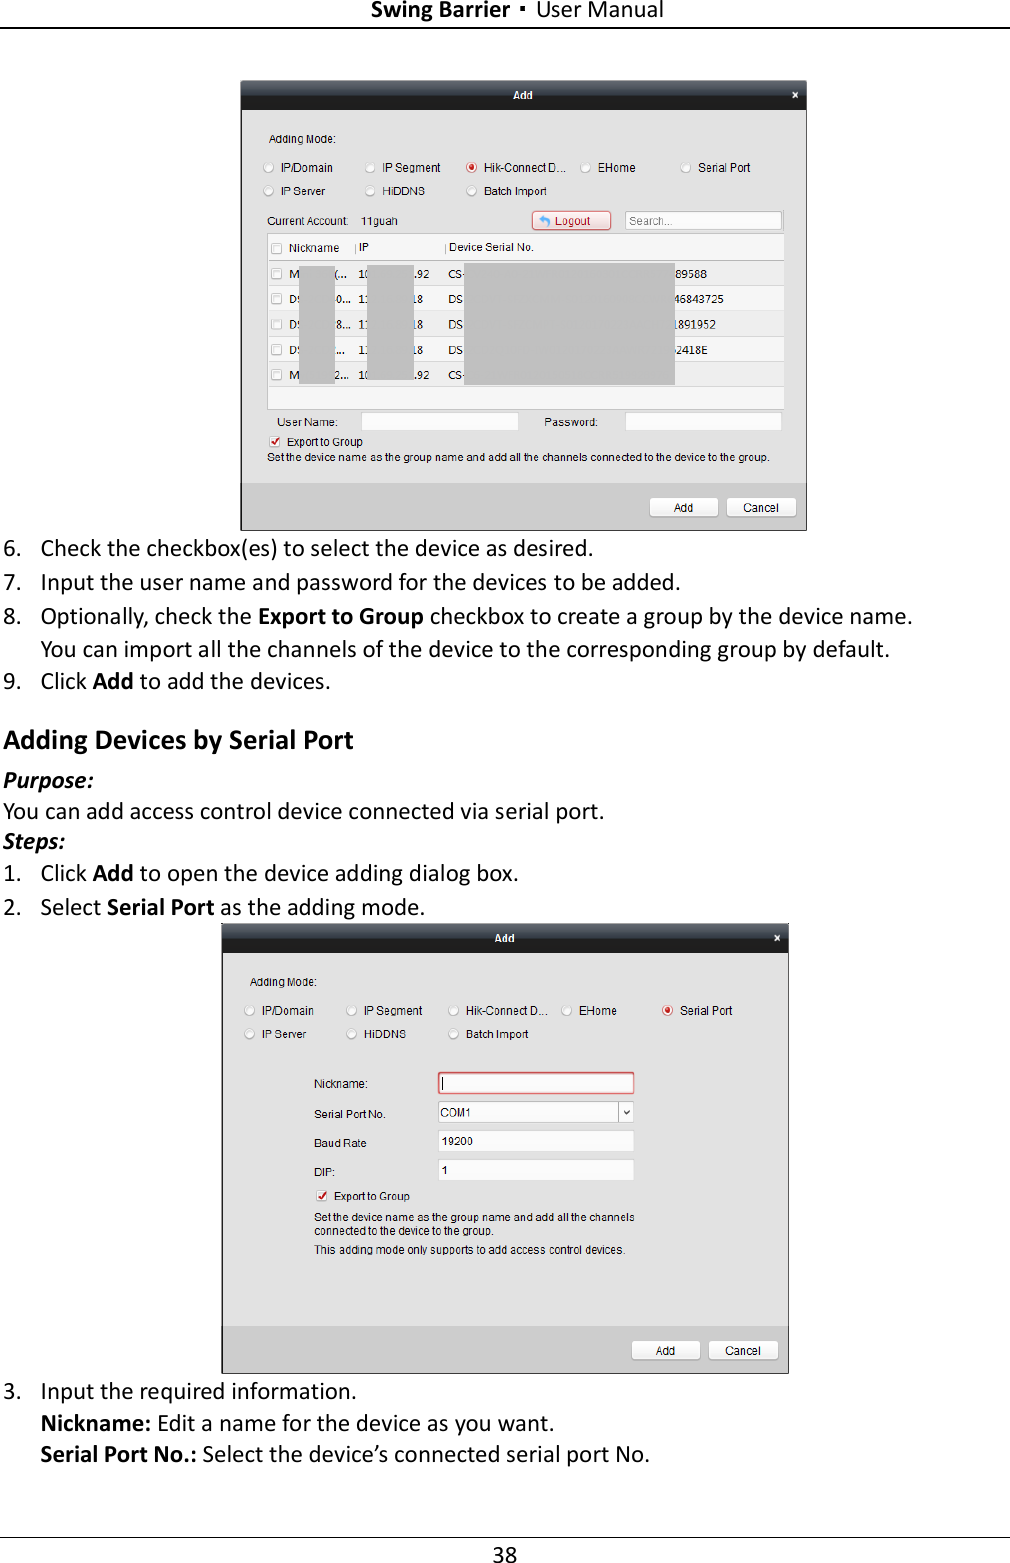 Swing Barrier·User Manual 38  6. Check the checkbox(es) to select the device as desired. 7. Input the user name and password for the devices to be added. 8. Optionally, check the Export to Group checkbox to create a group by the device name.   You can import all the channels of the device to the corresponding group by default. 9. Click Add to add the devices. Adding Devices by Serial Port Purpose: You can add access control device connected via serial port. Steps: 1. Click Add to open the device adding dialog box. 2. Select Serial Port as the adding mode.   3. Input the required information. Nickname: Edit a name for the device as you want. Serial Port No.: Select the device’s connected serial port No.   